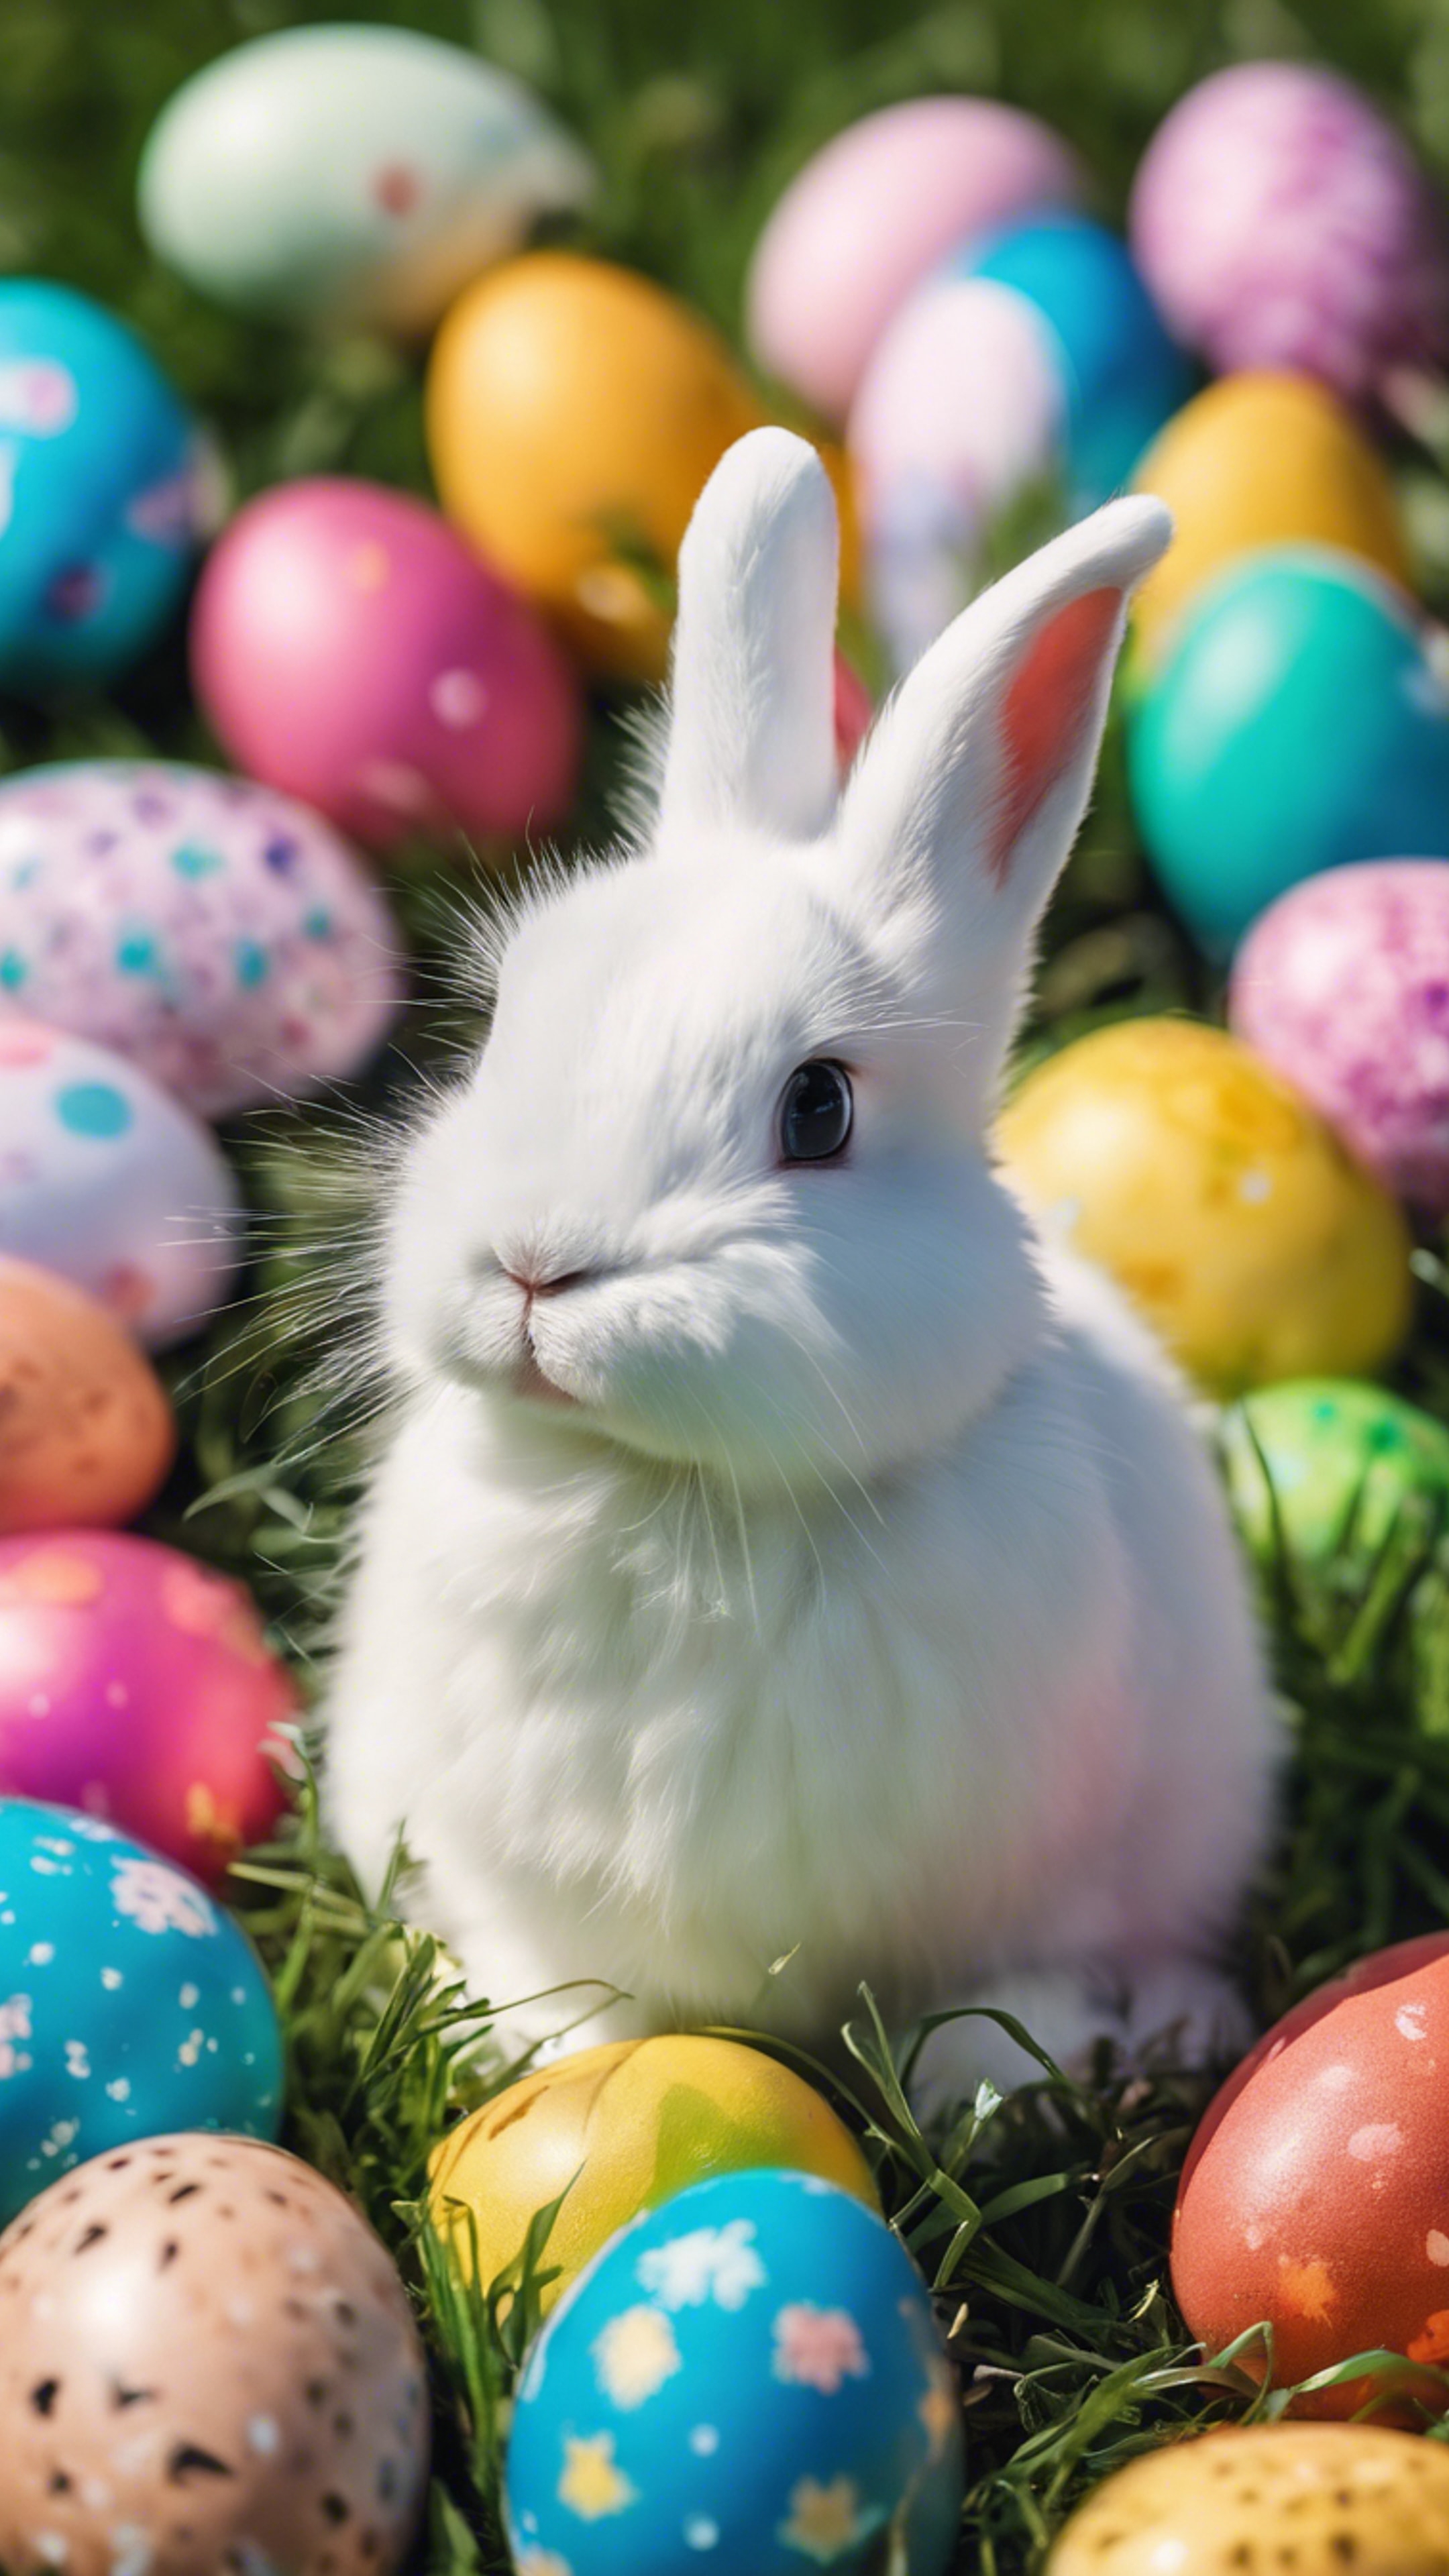 A group of fluffy rabbits surrounded by colorful Easter eggs in a sunny meadow. Papel de parede[da4f773d6ea74733b4fe]